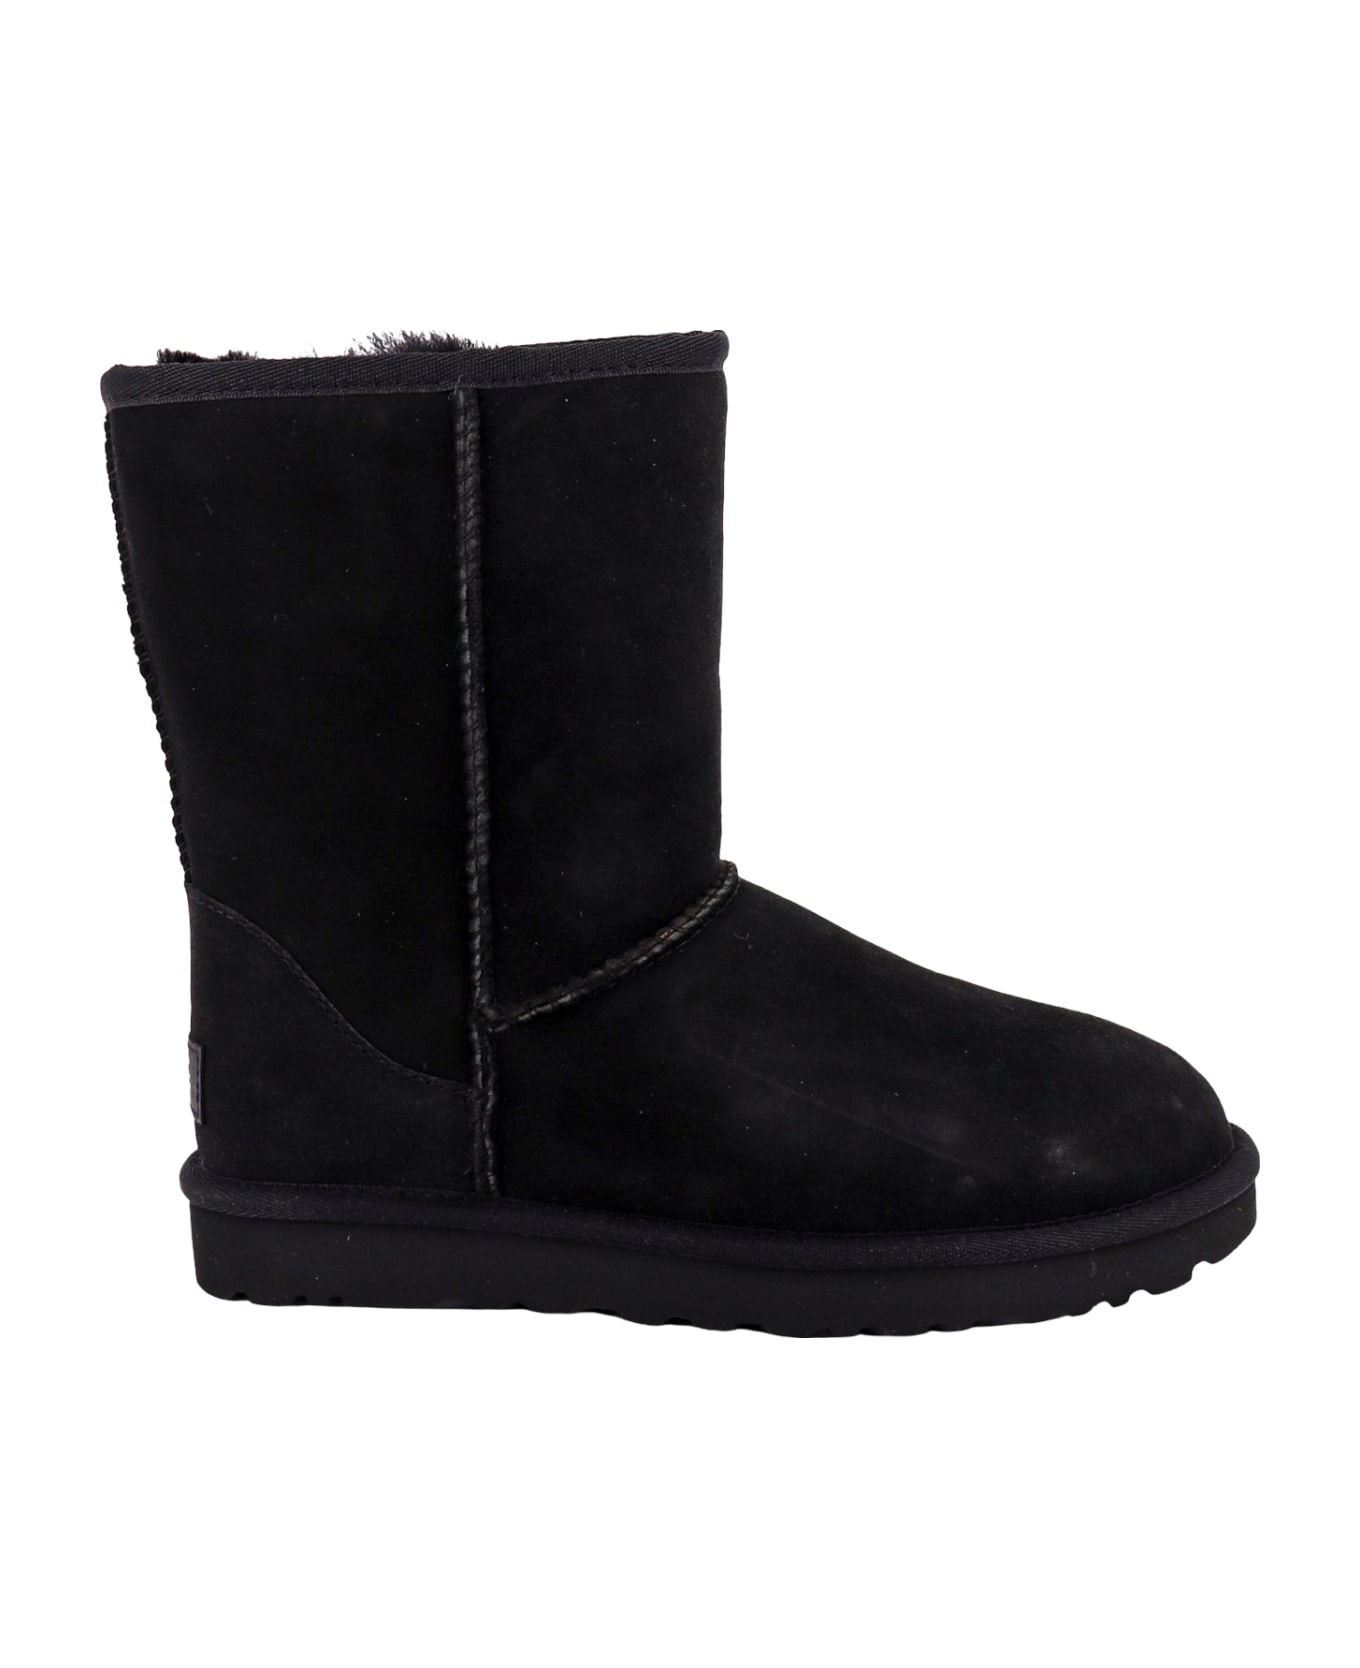 UGG Classic Short Ankle Boots - Black